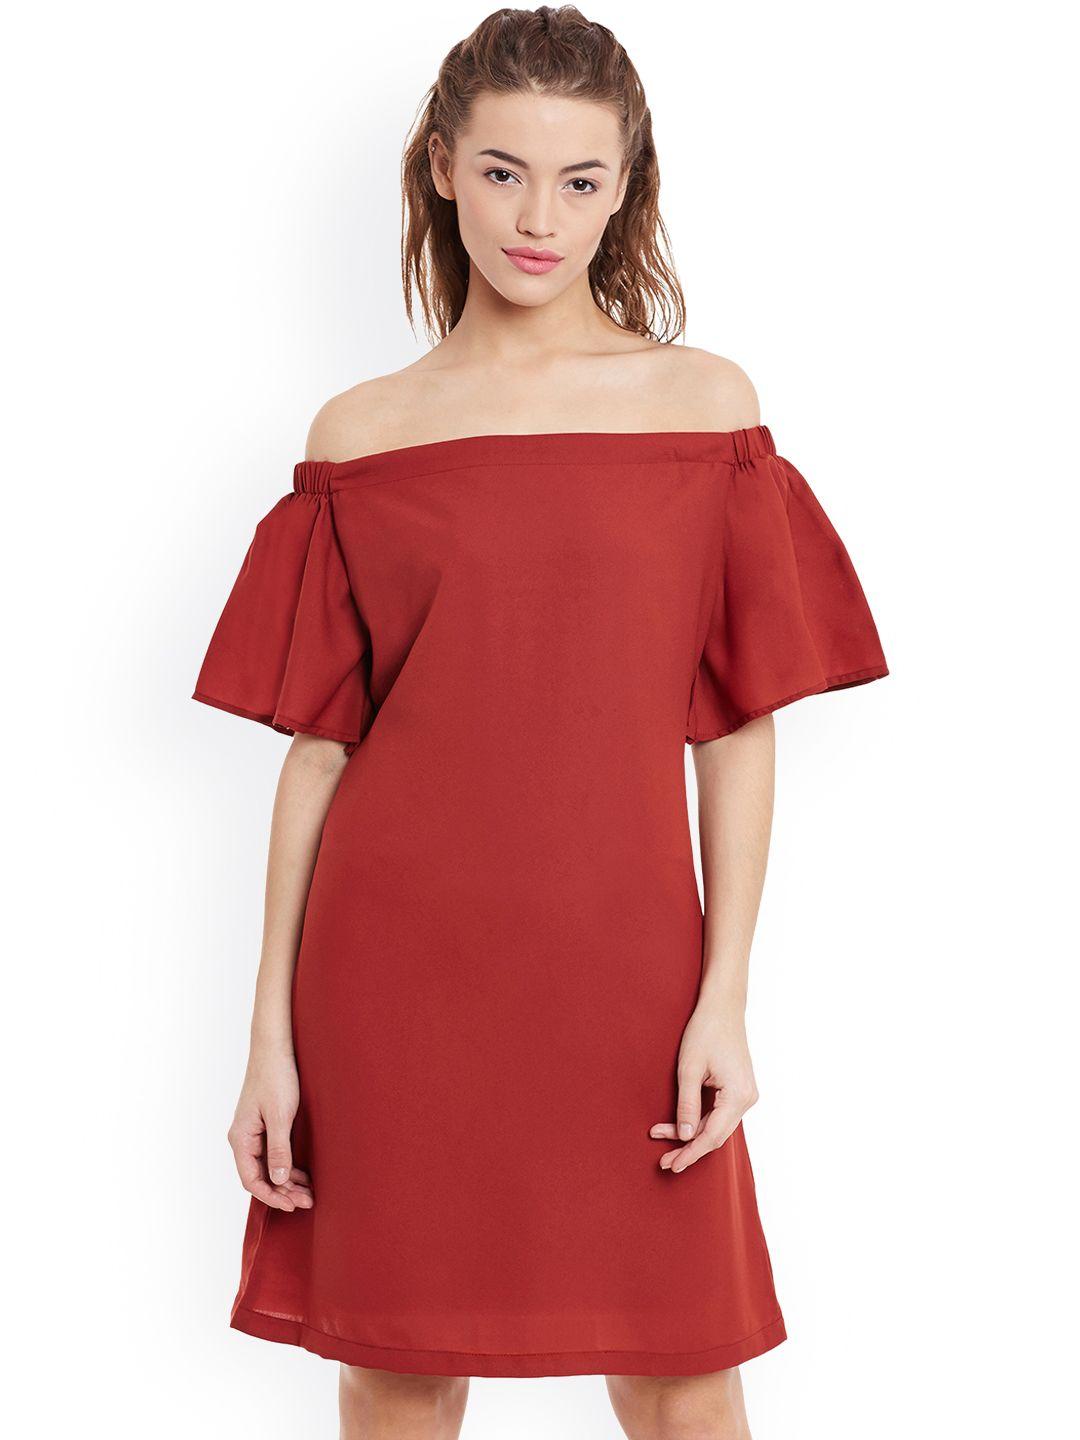 miss-chase-women-maroon-solid-fit-and-flare-dress